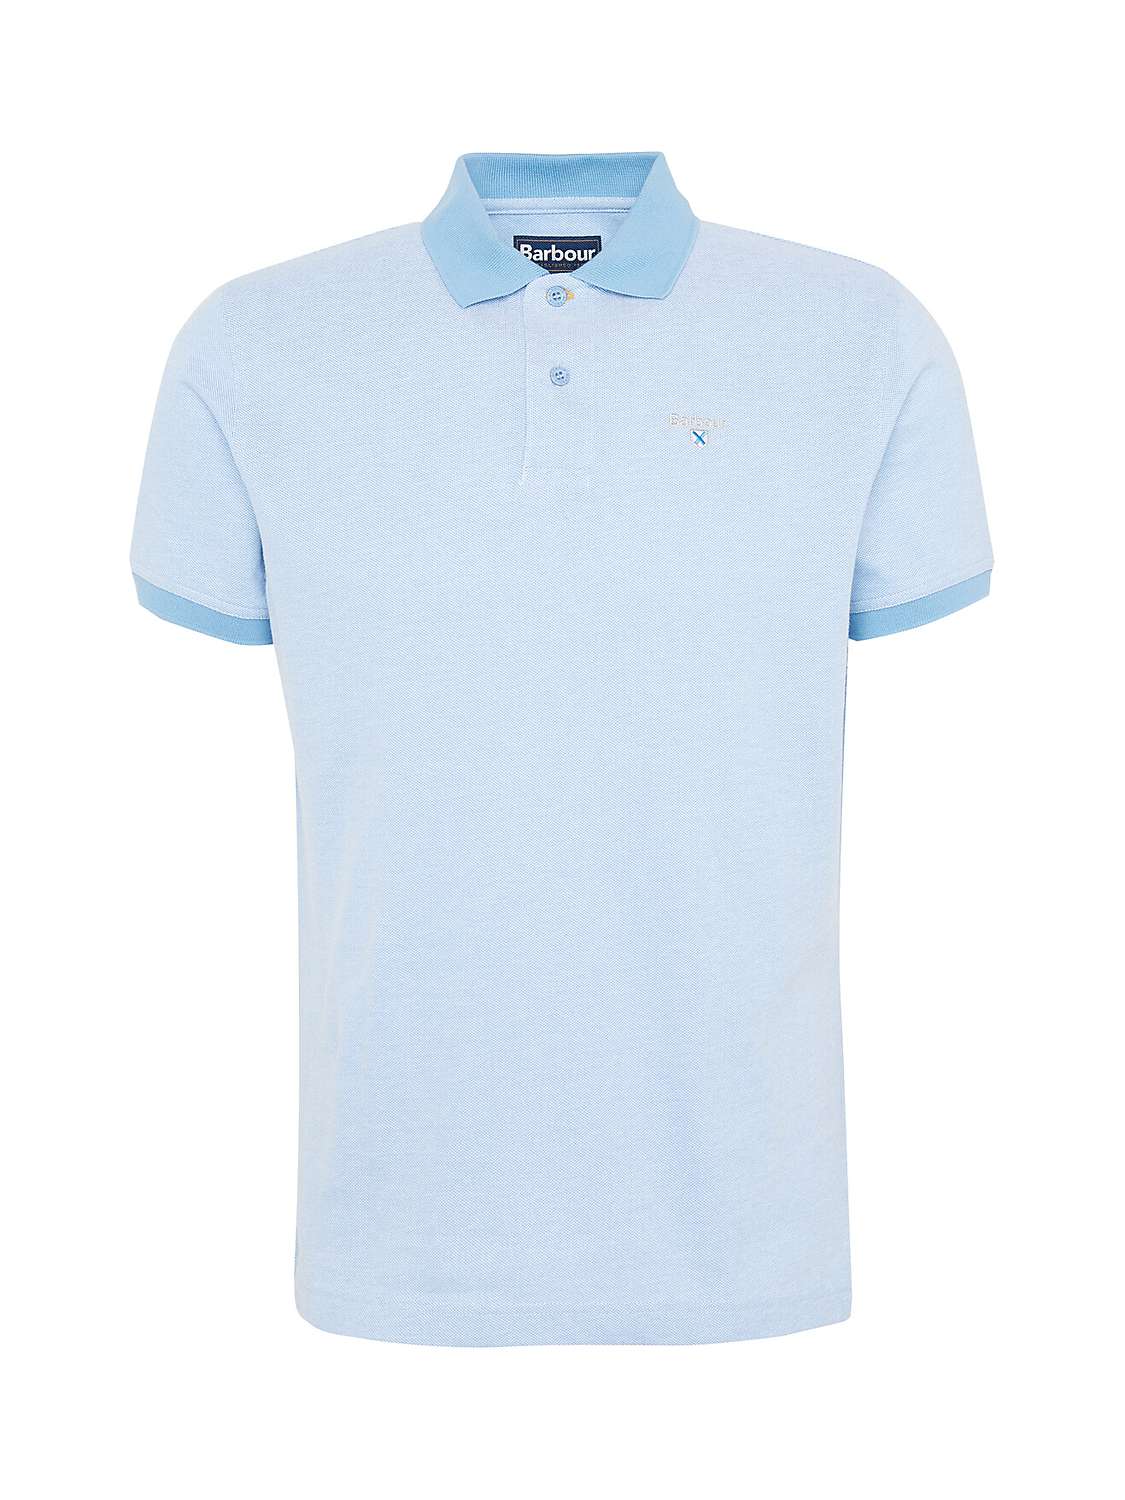 Barbour Essential Sports Mix Polo Shirt, Chambray at John Lewis & Partners